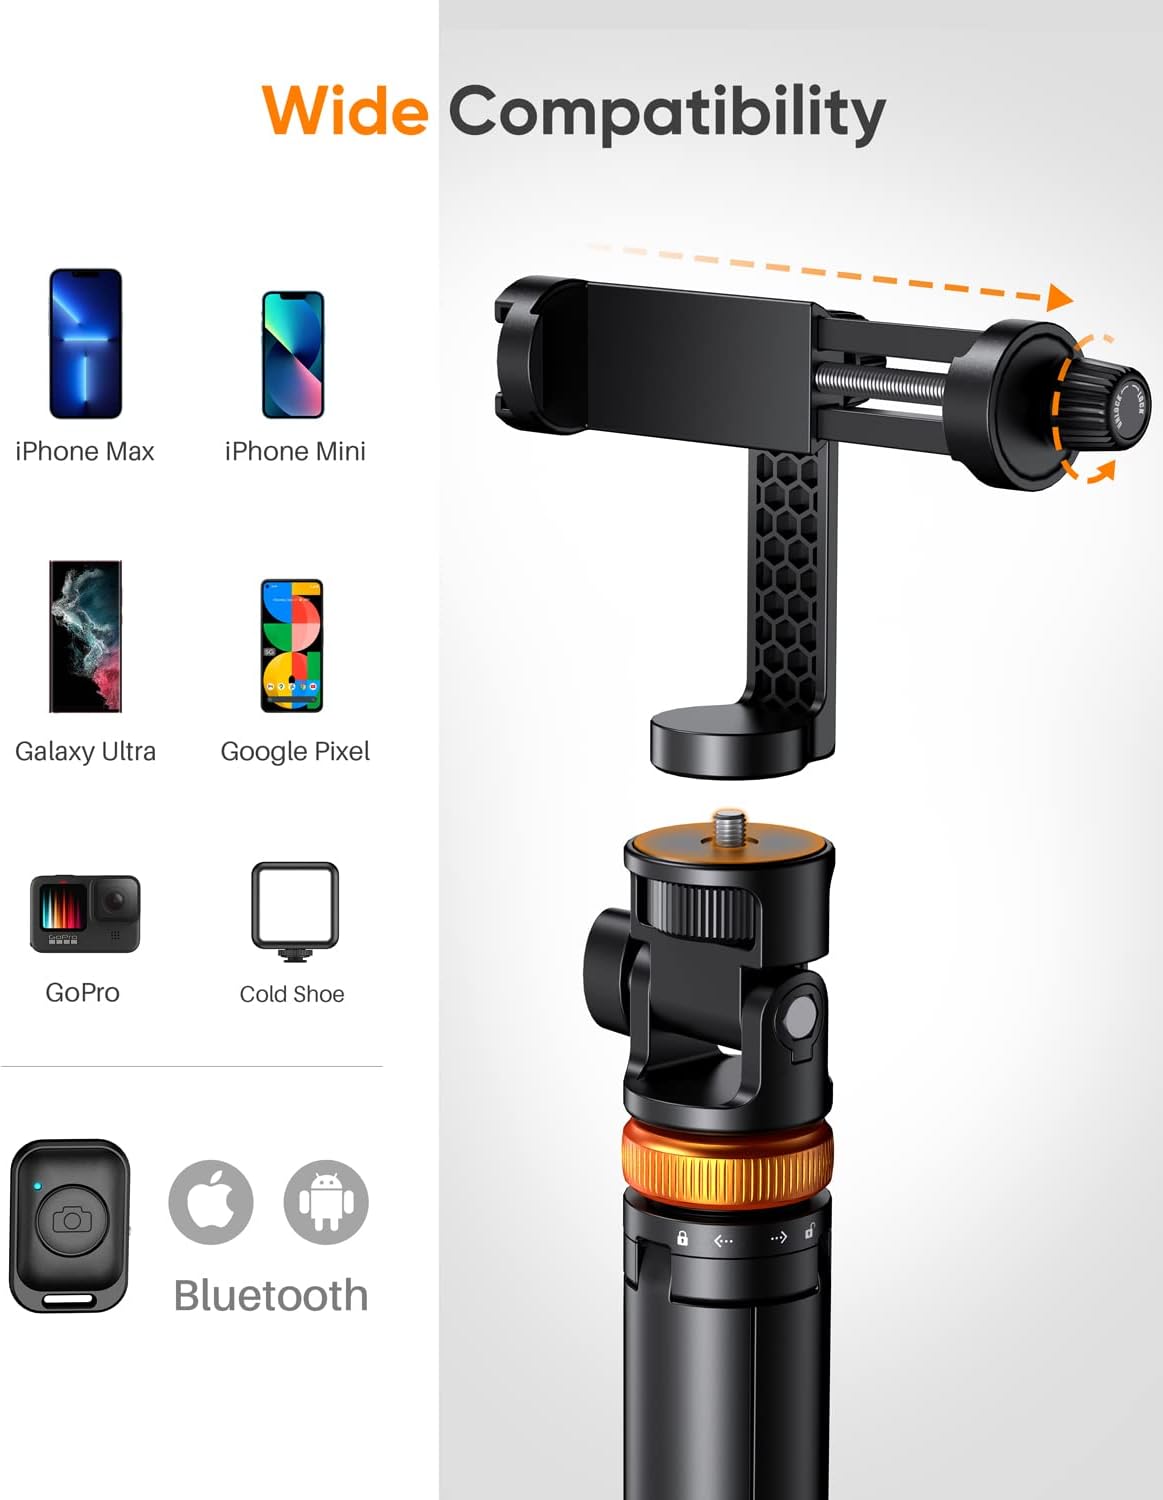 Tripod extendable up to 62 inches for phones